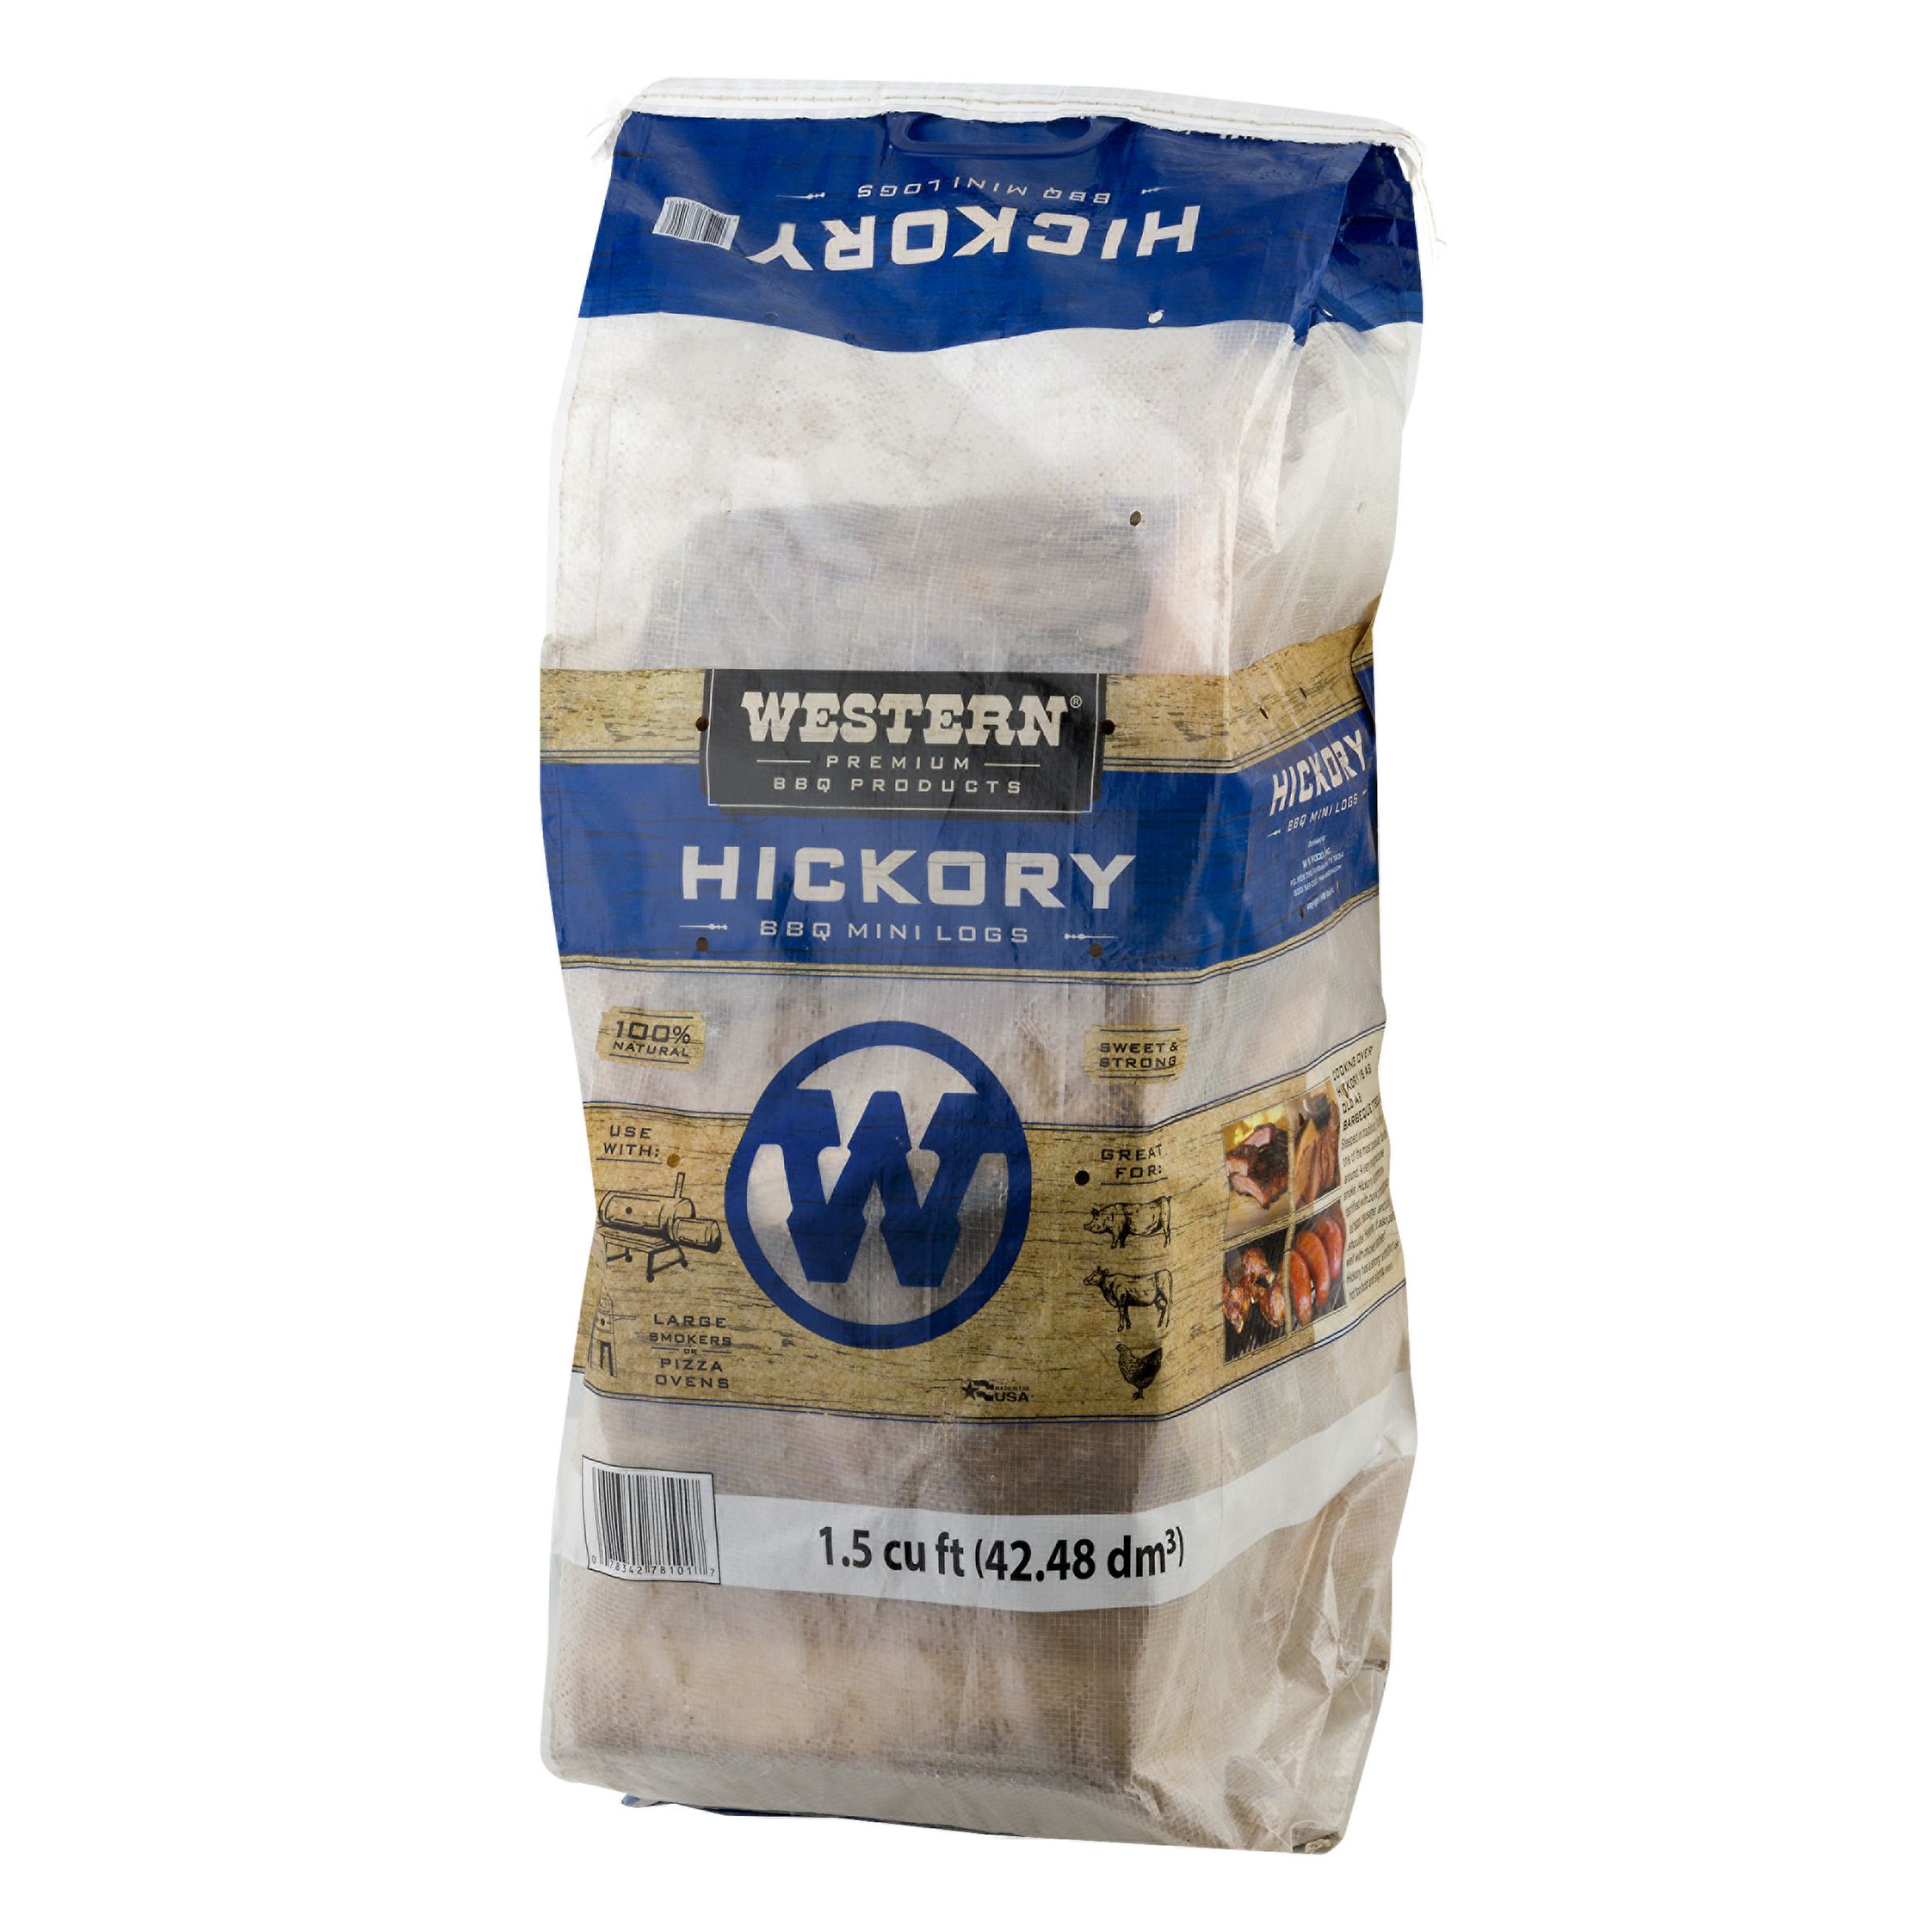 Western Premium BBQ Products 1.5 cu ft Hickory BBQ Smoking Mini Logs - image 3 of 8